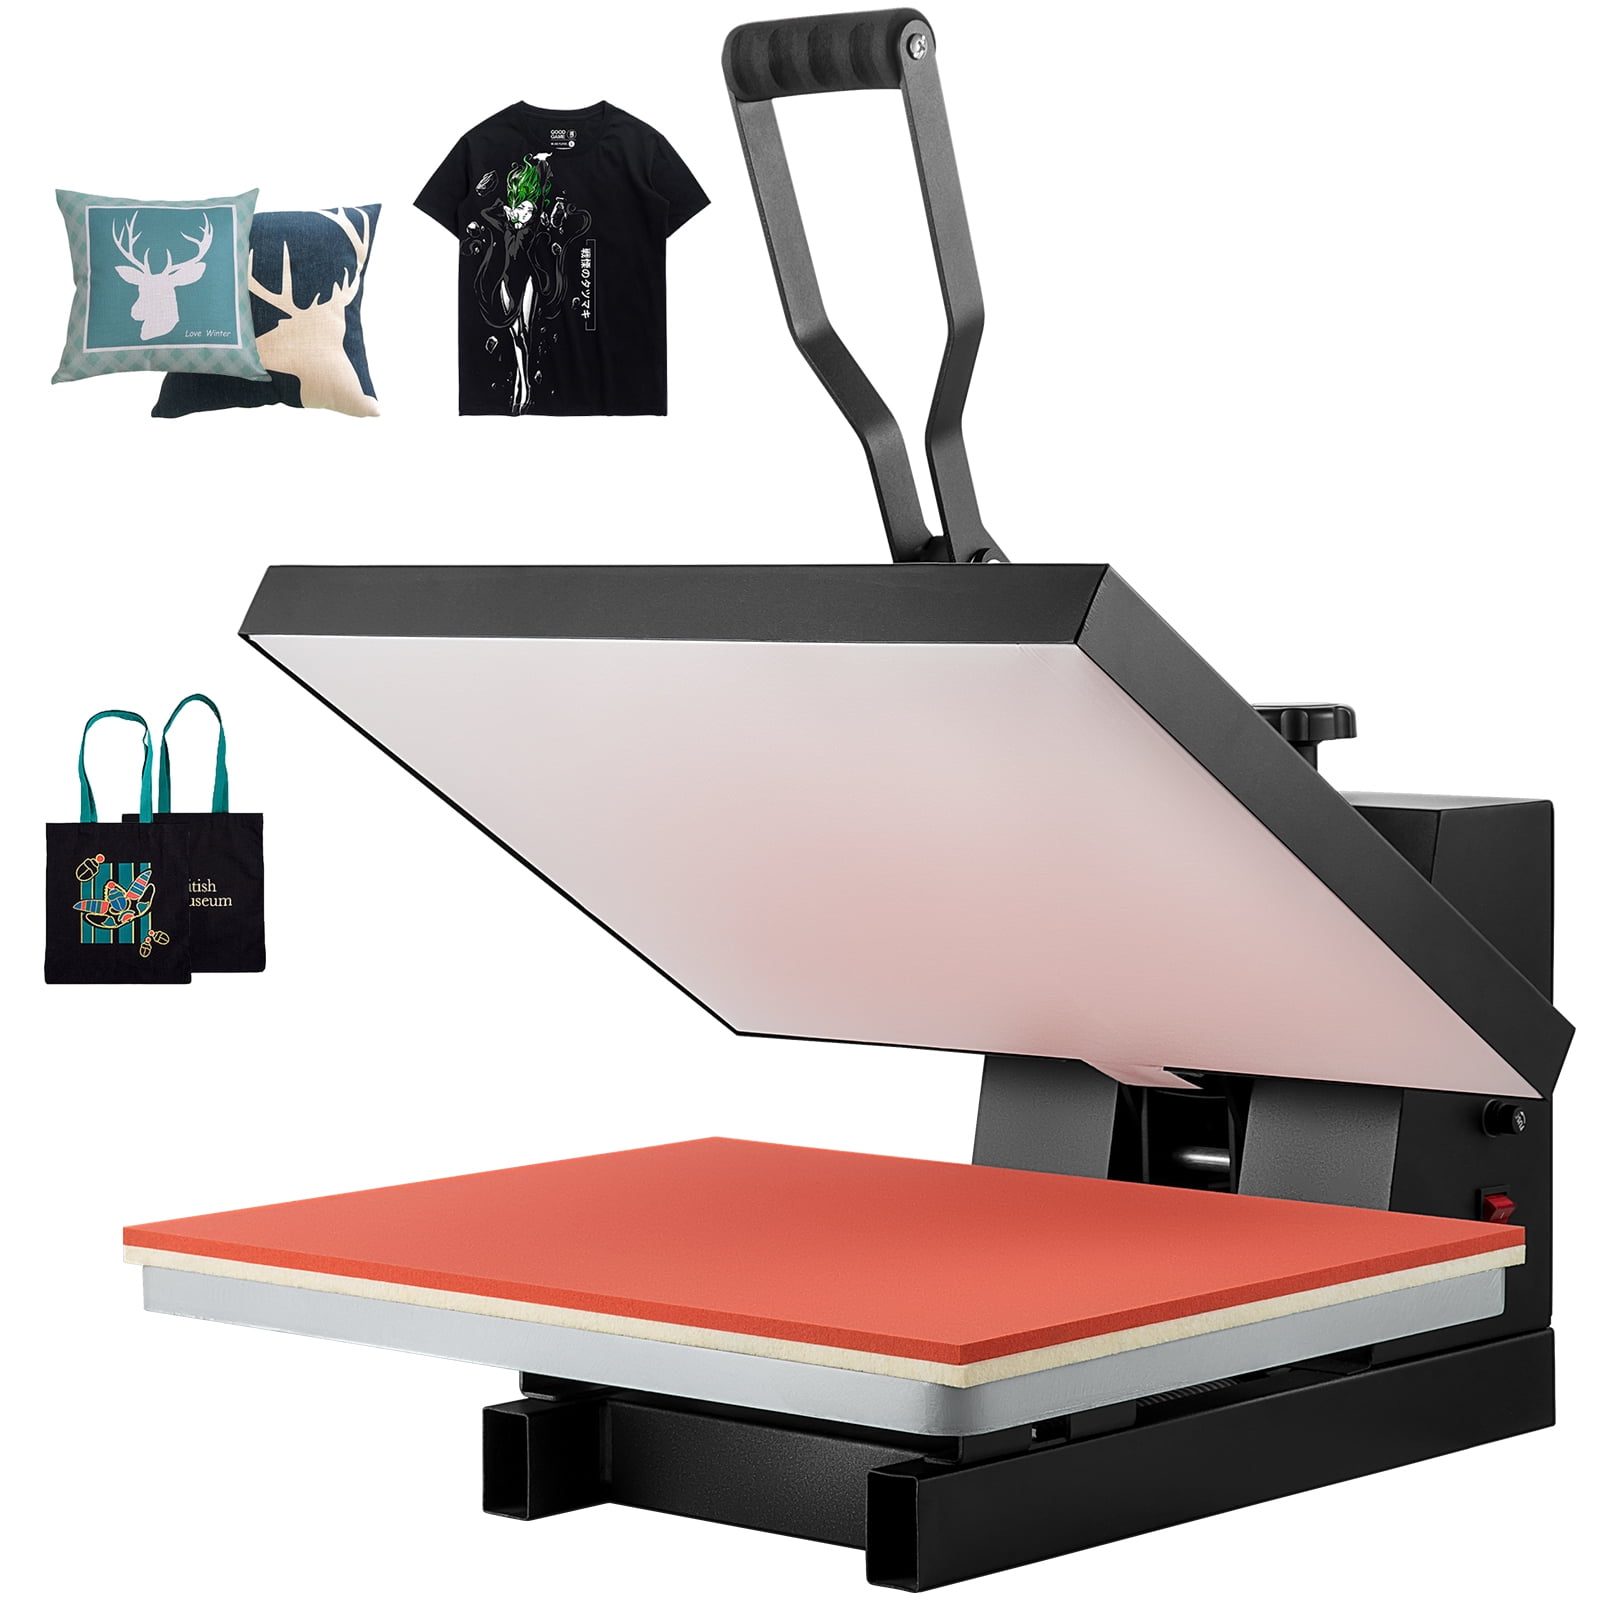 US$ 290.00 - 16*24 inches (40*60cm) Clamshell Heat Press Manufacturer  Experience Heat Transfer Machine - m.